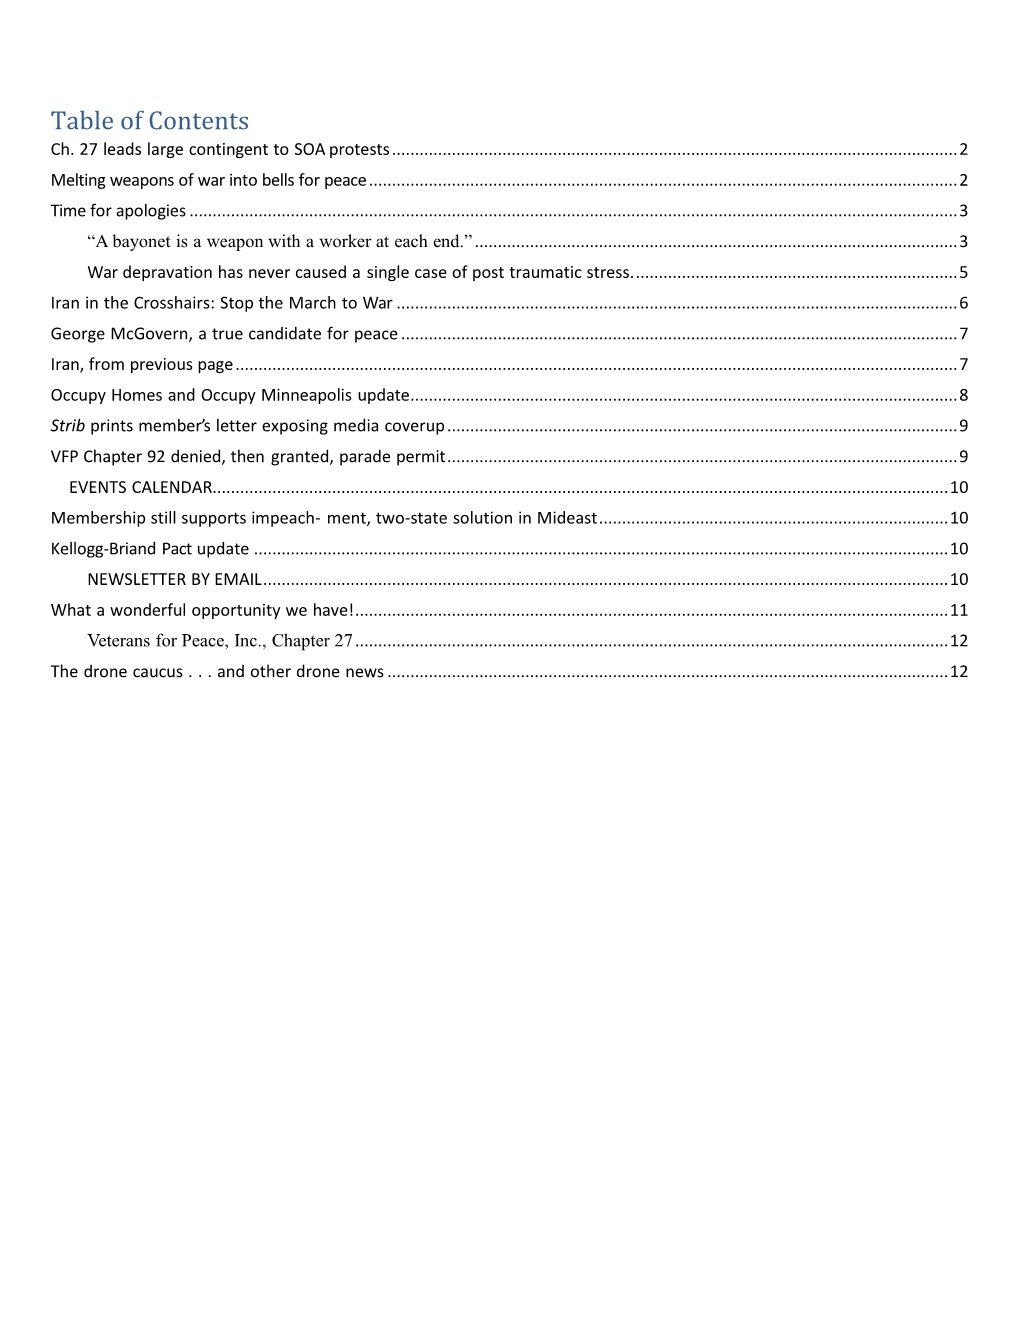 Table of Contents Ch